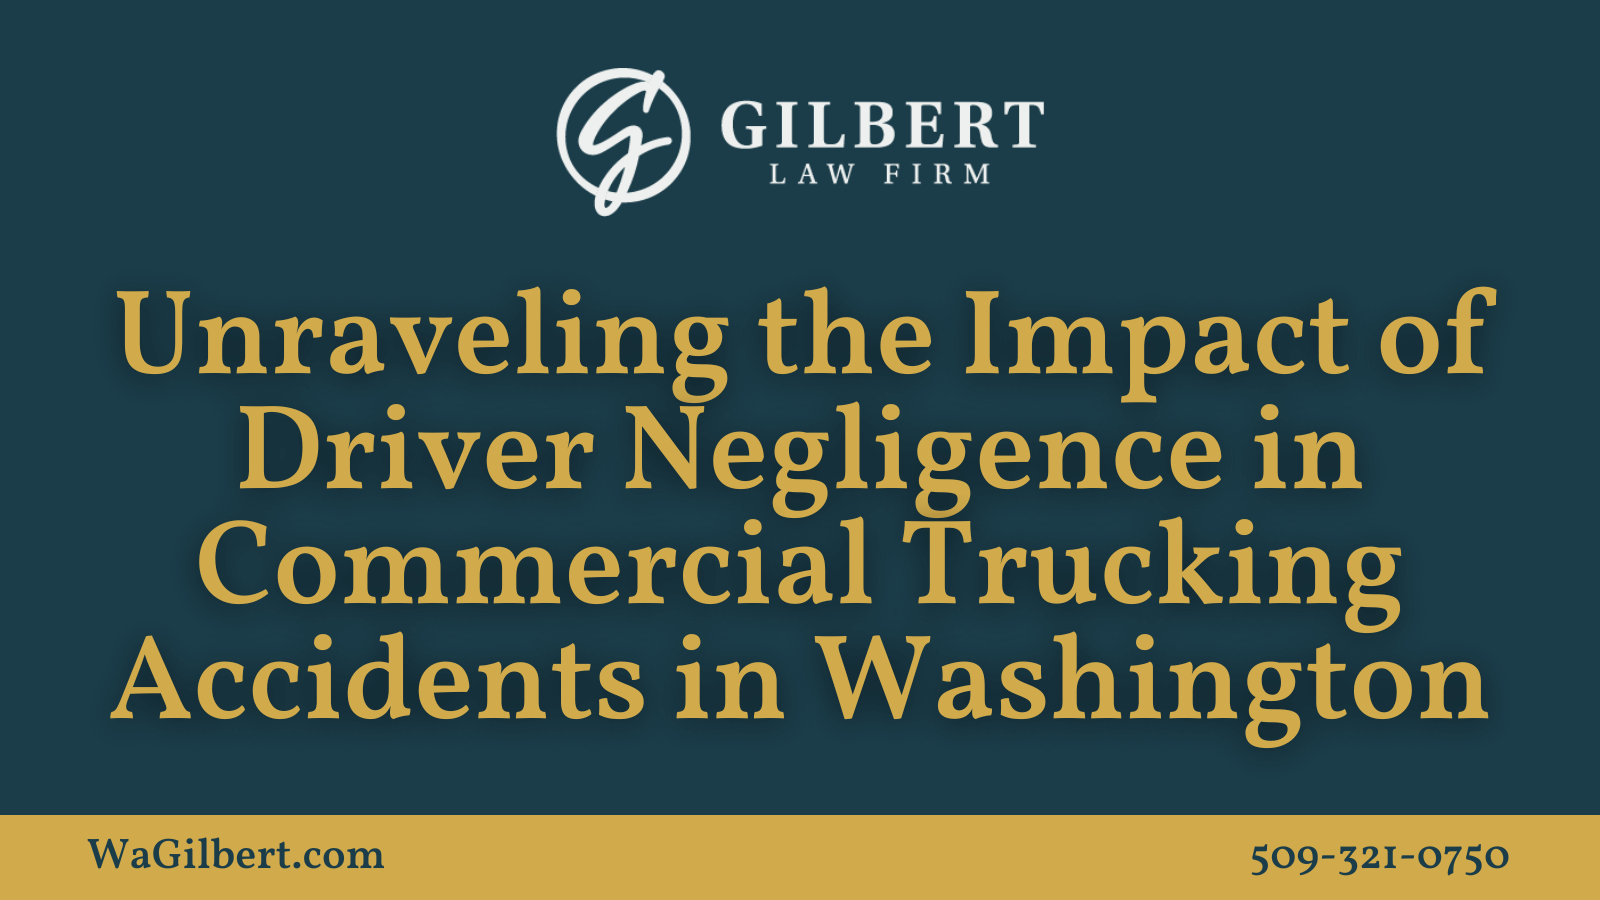 Unraveling the Impact of Driver Negligence in Commercial Trucking Accidents in Washington